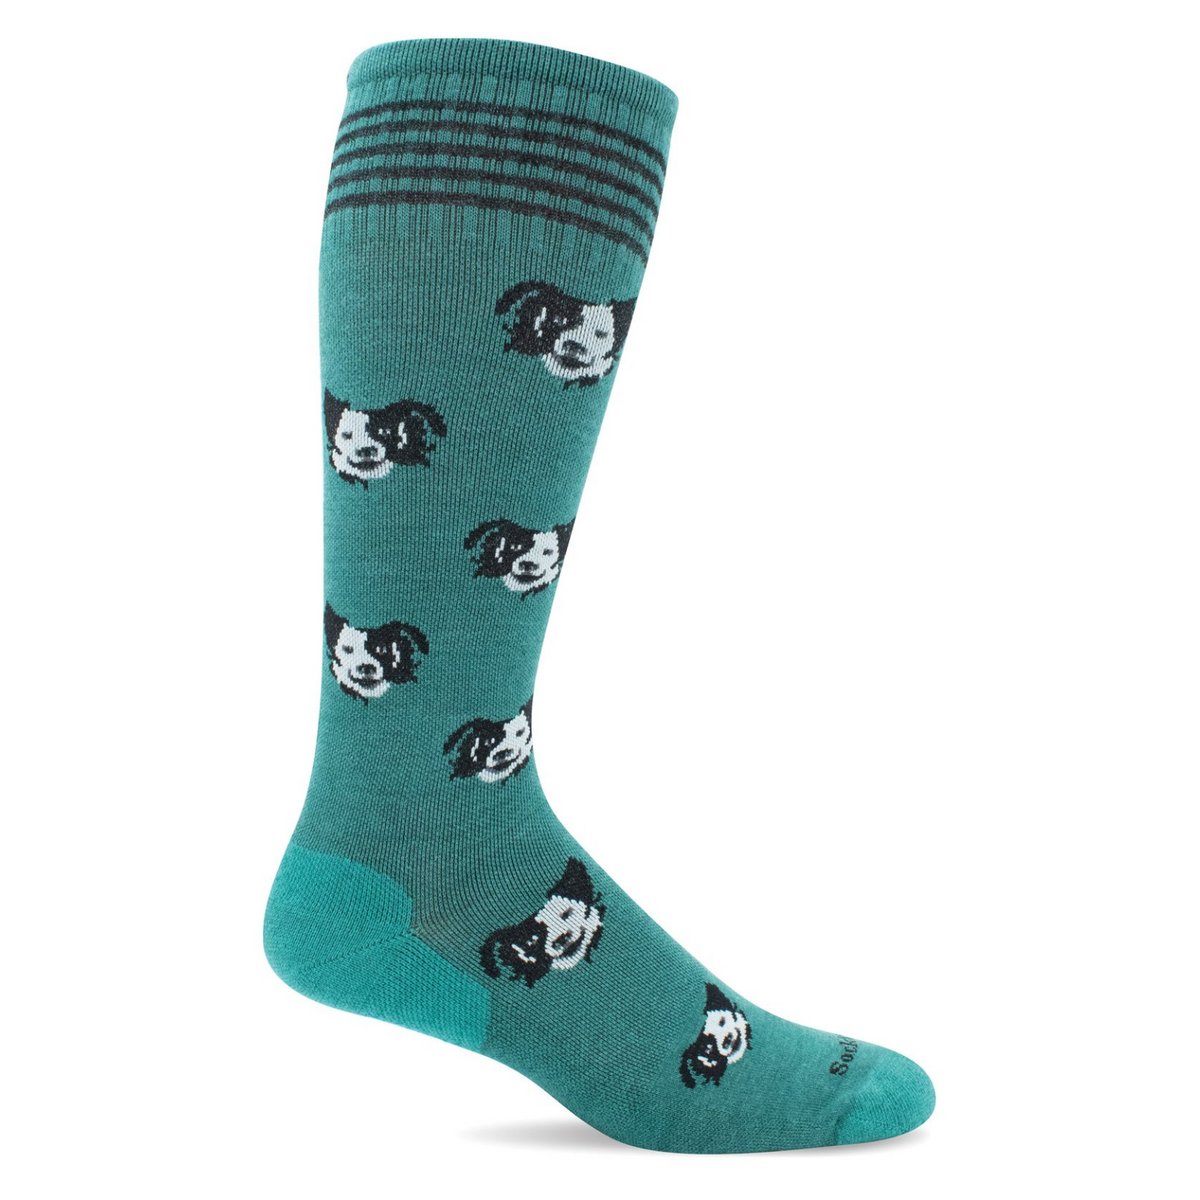 Sockwell Canine Cuddle moderate graduated compression (15-20 mmHg) women&#39;s sock featuring green knee high with dog faces